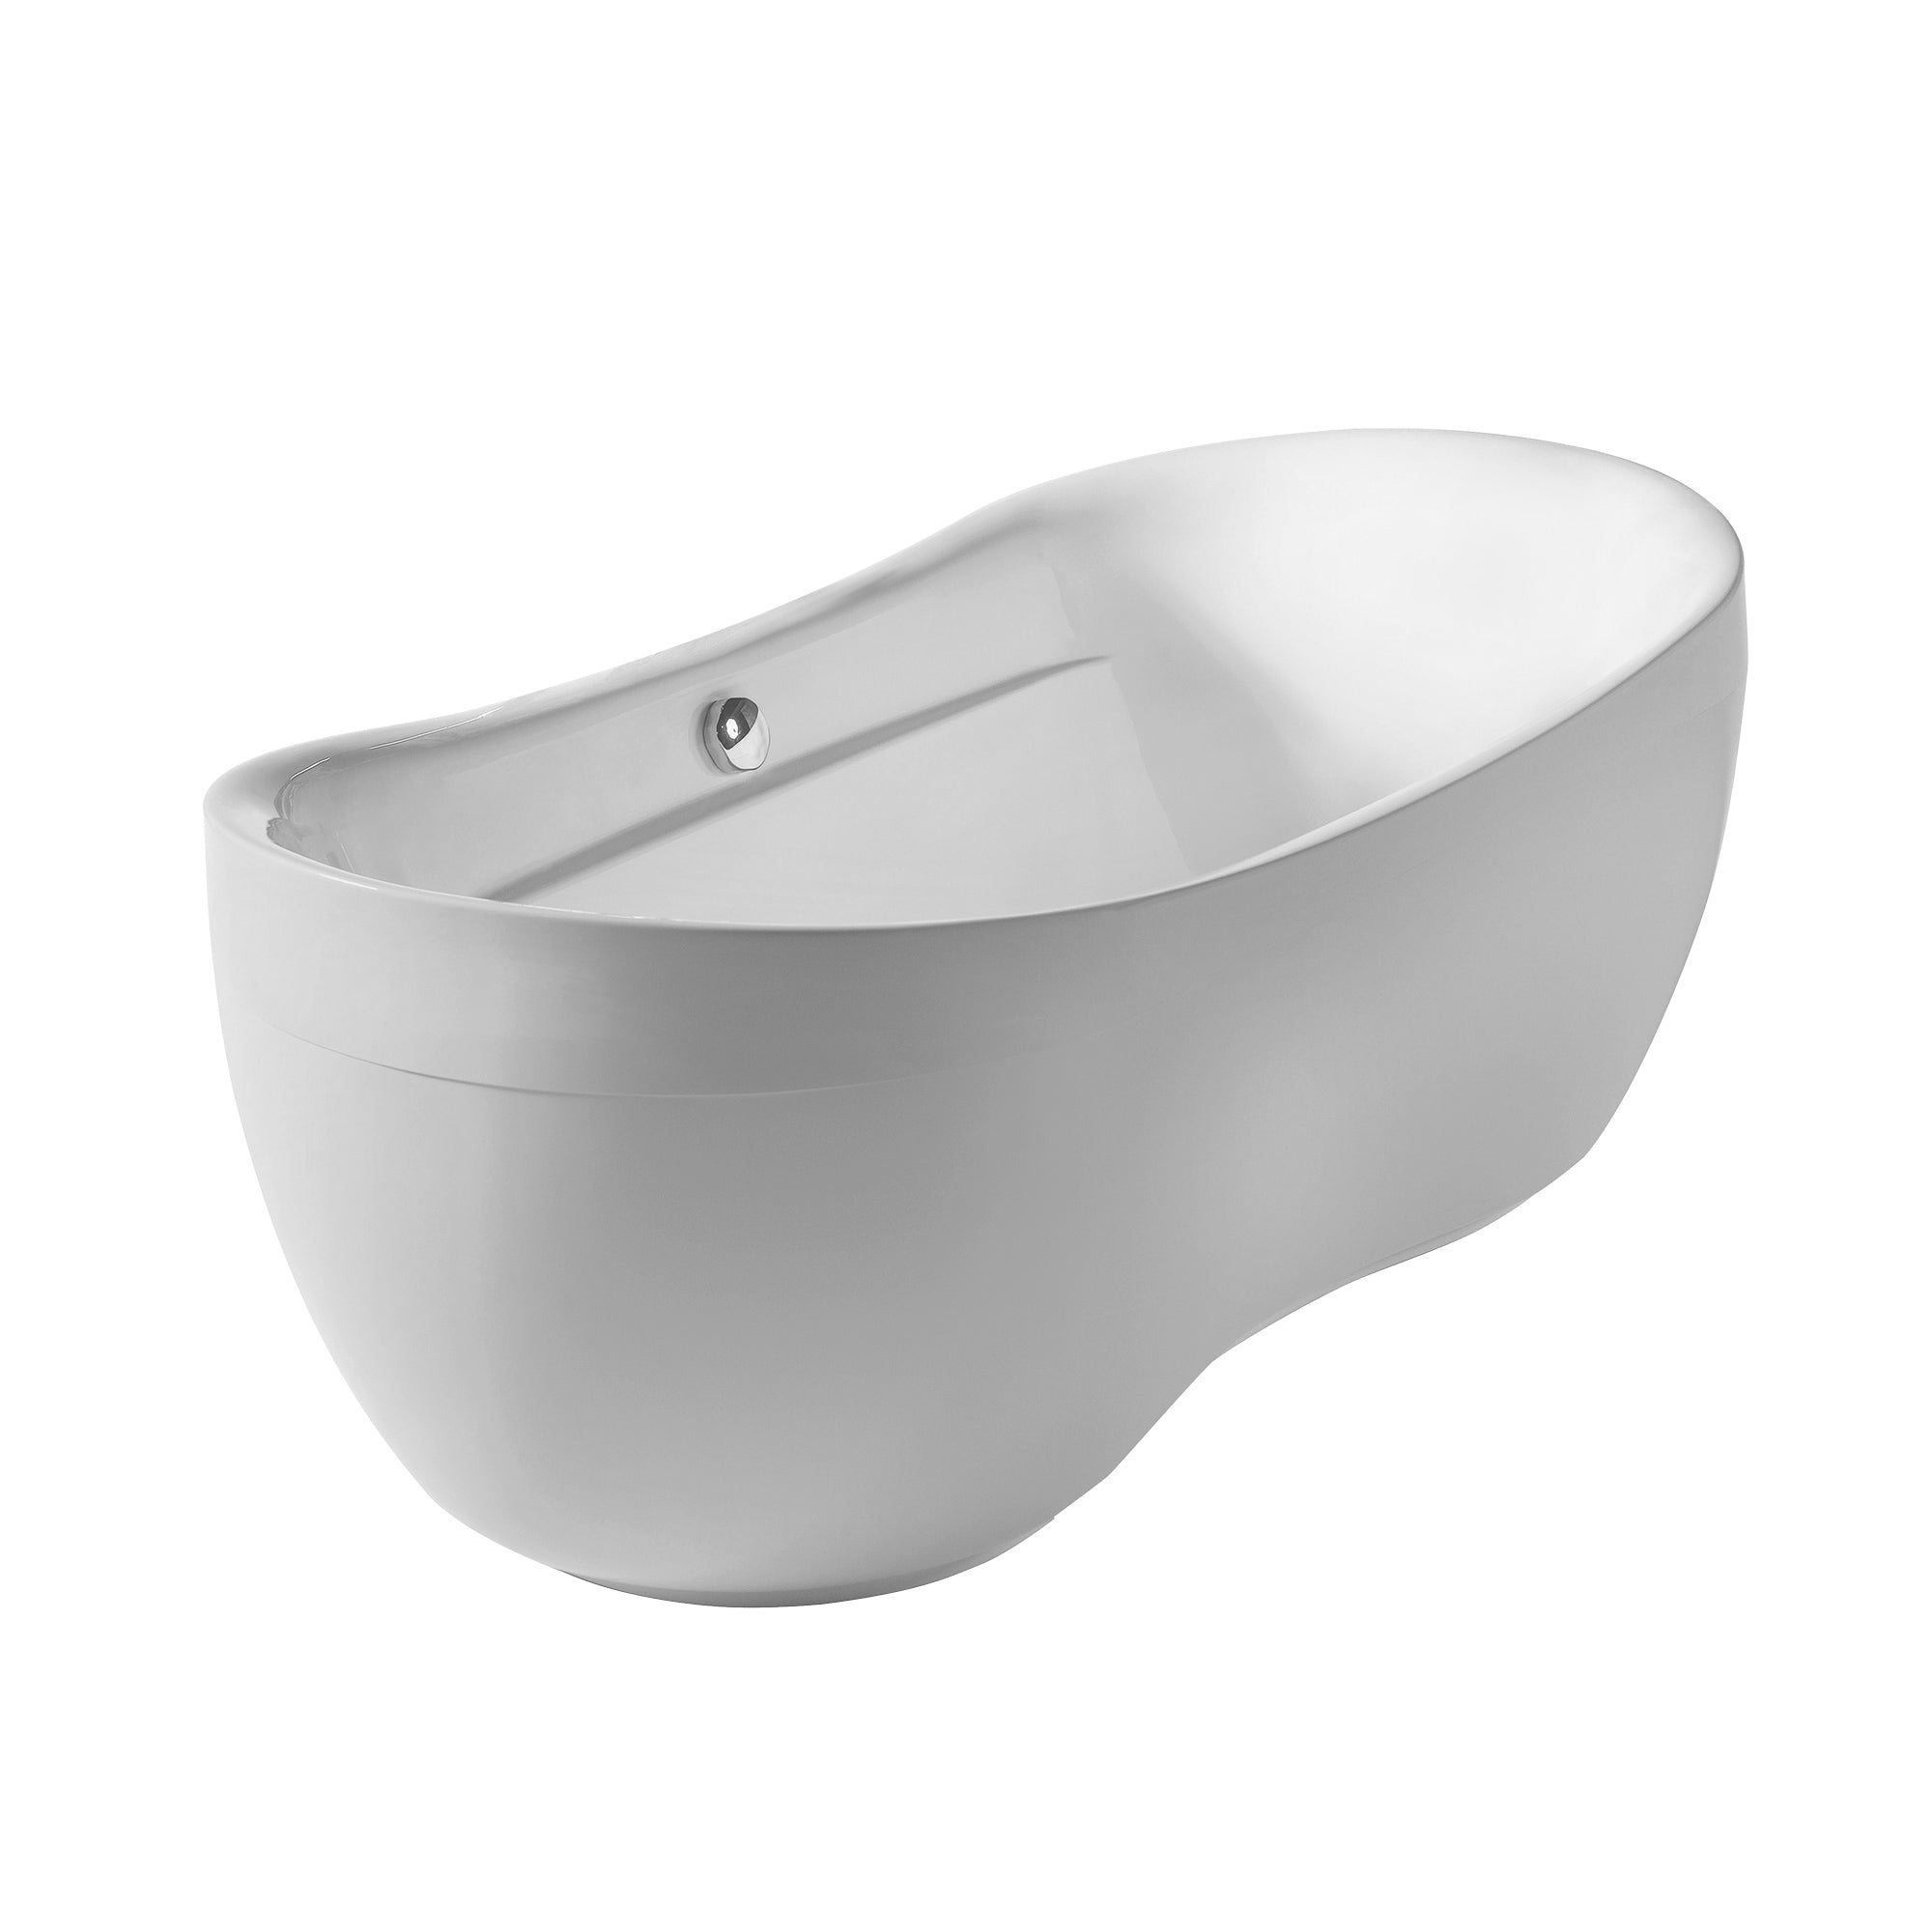 Oval Double Ended Lucite Acrylic Freestanding Bathtub with Curved Rim